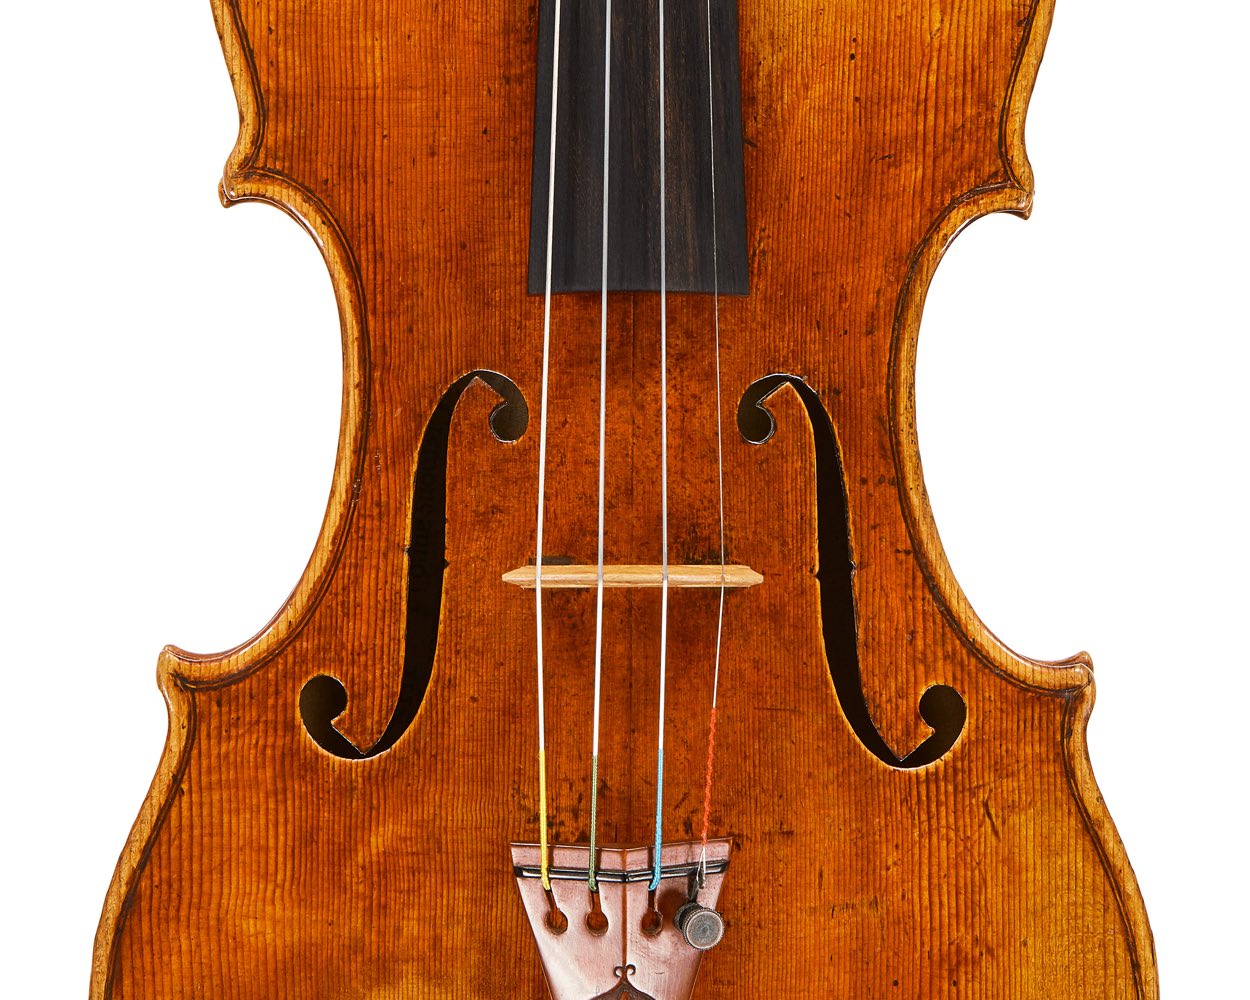 One of the finest Guarneris in existence: the 1734 'Violon du Diable' -